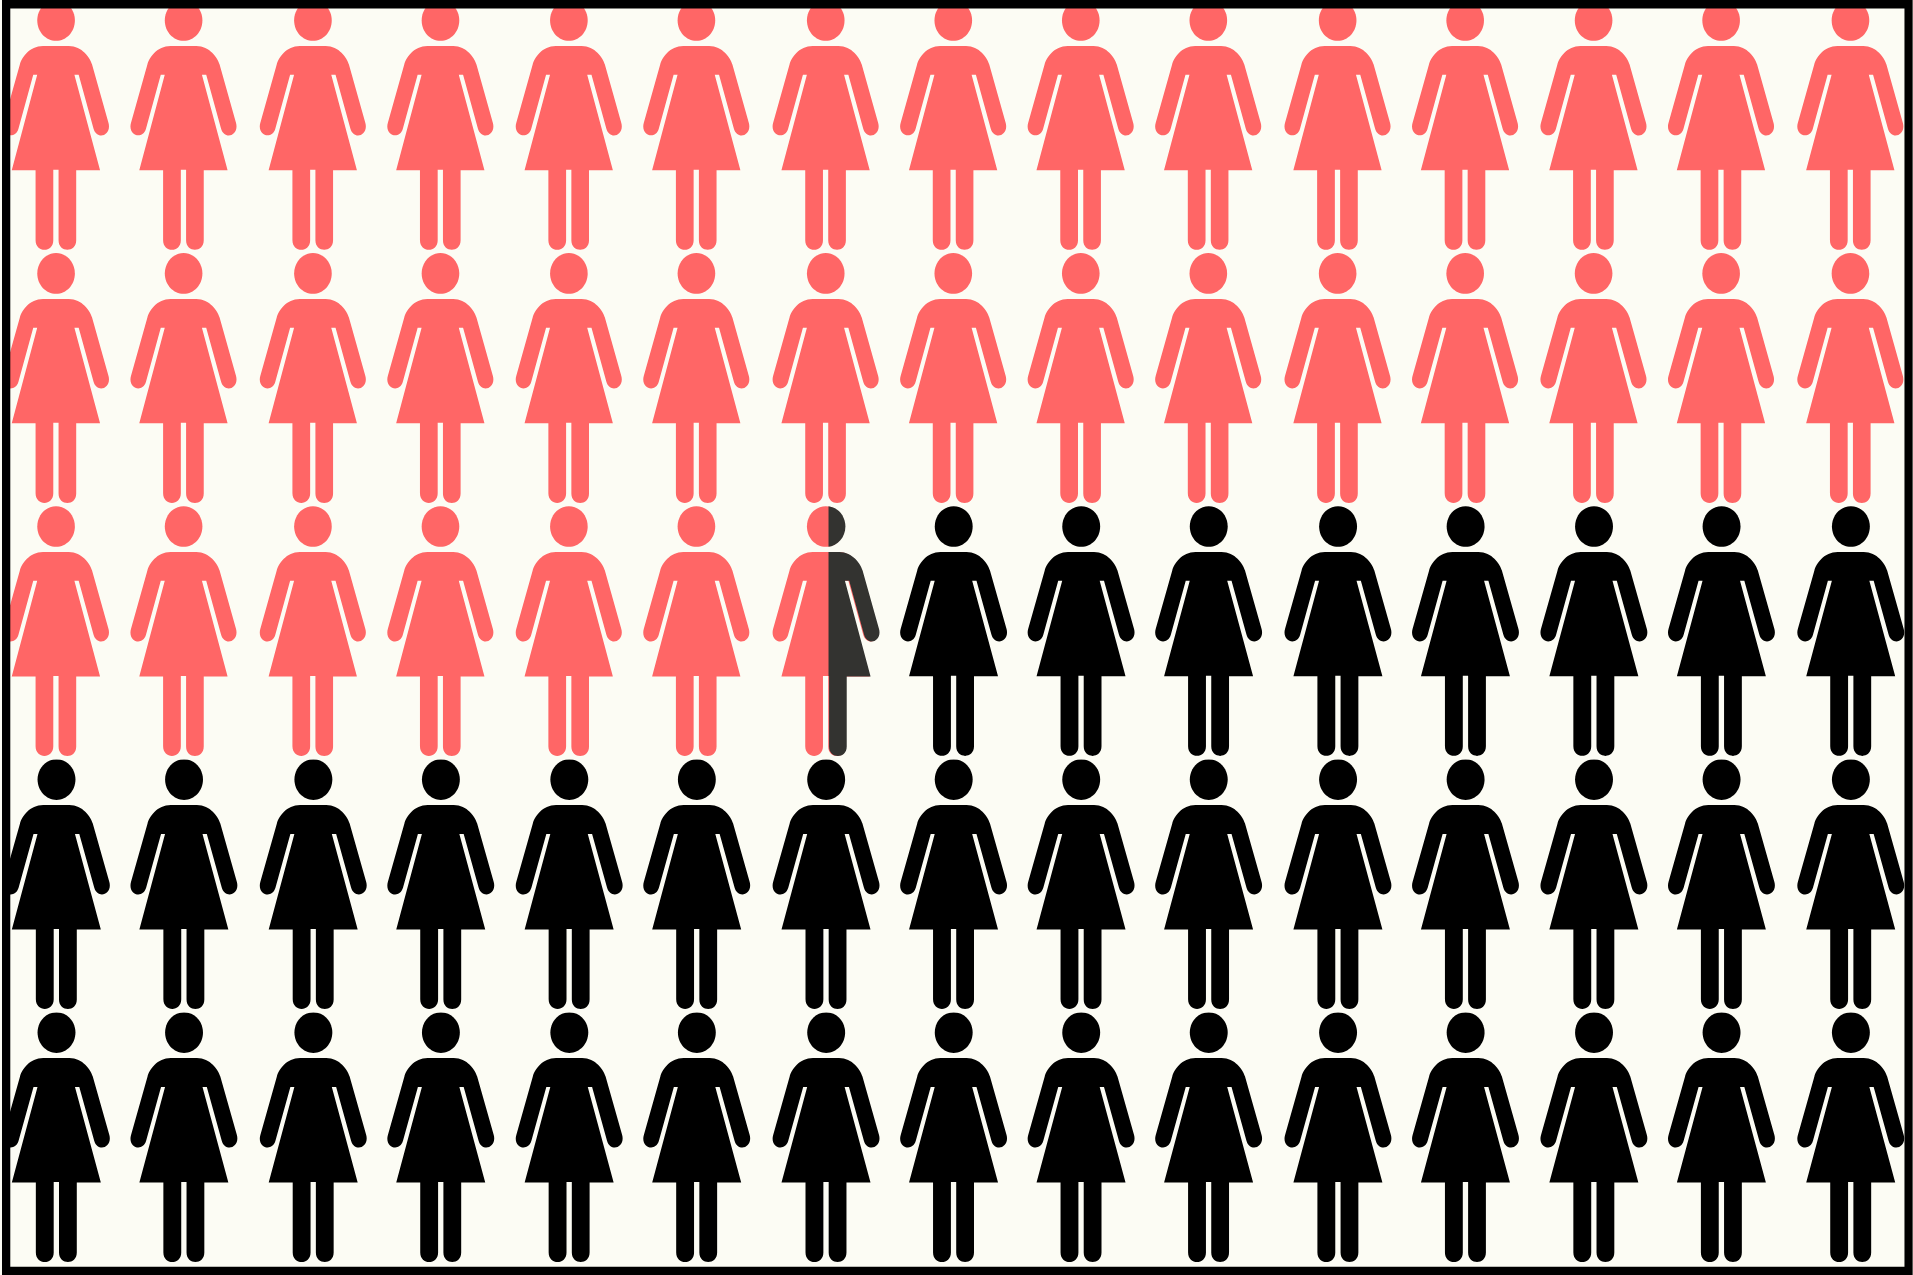 A graphic of 75 female icons, half in coral, half in black, one split down the middle.